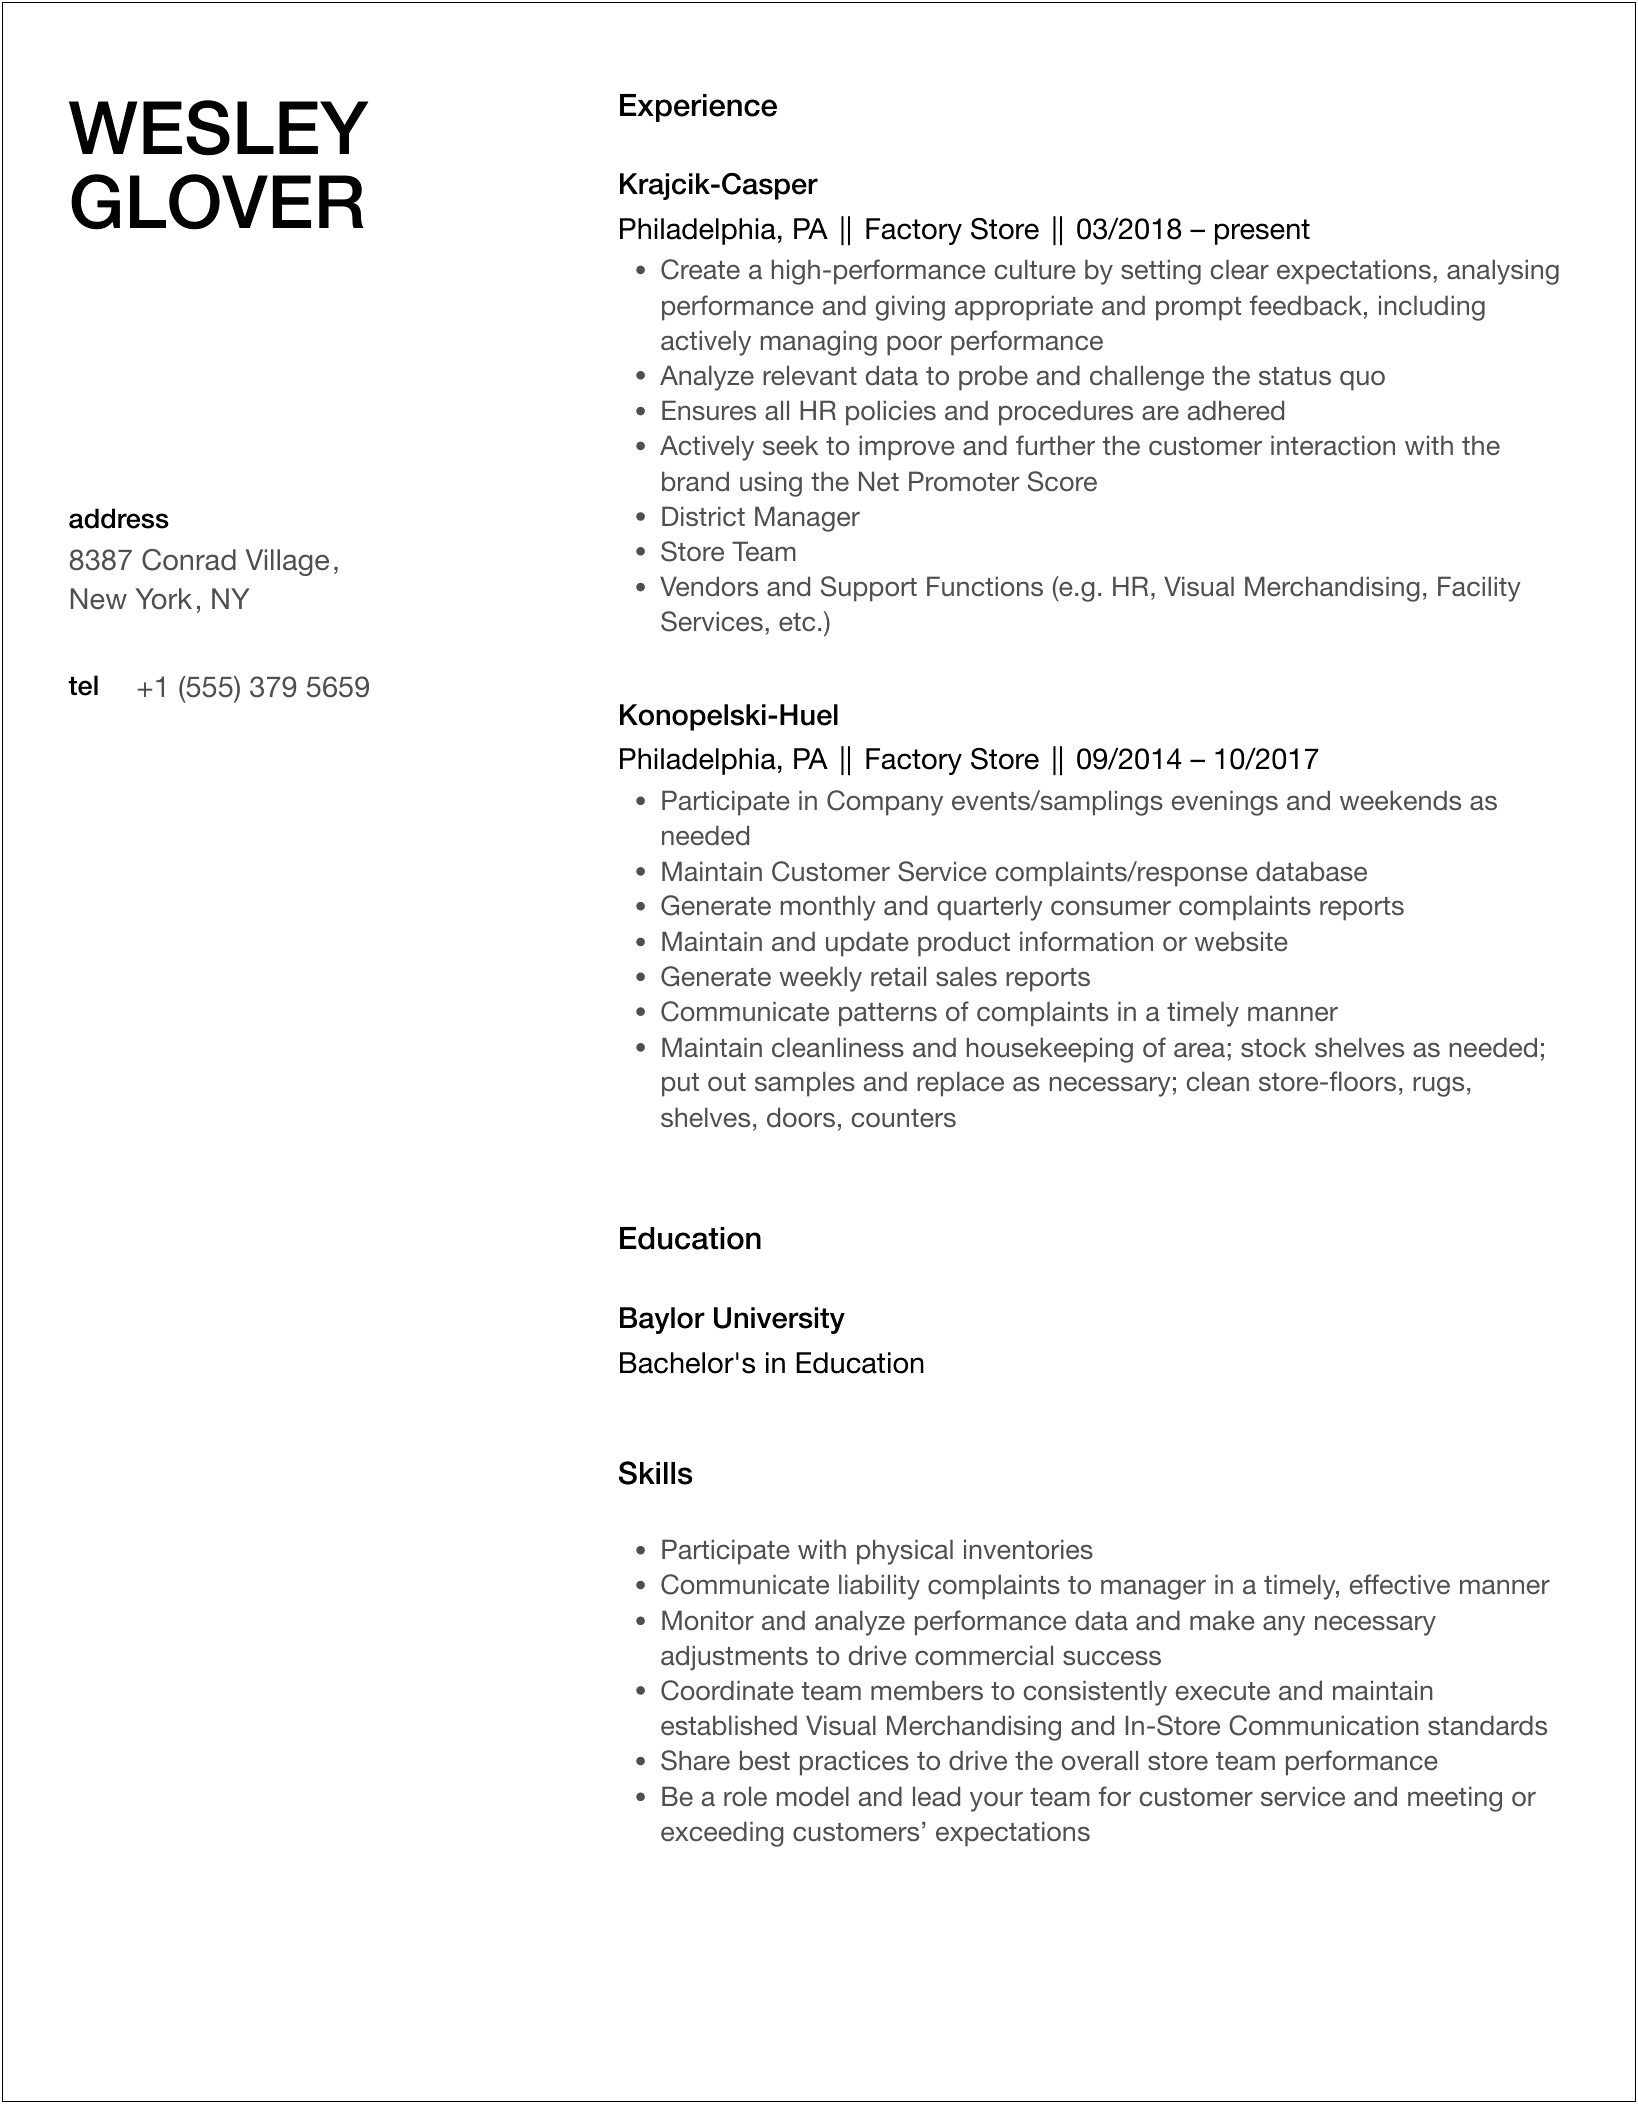 Banana Republic Assistant Store Manager Resume